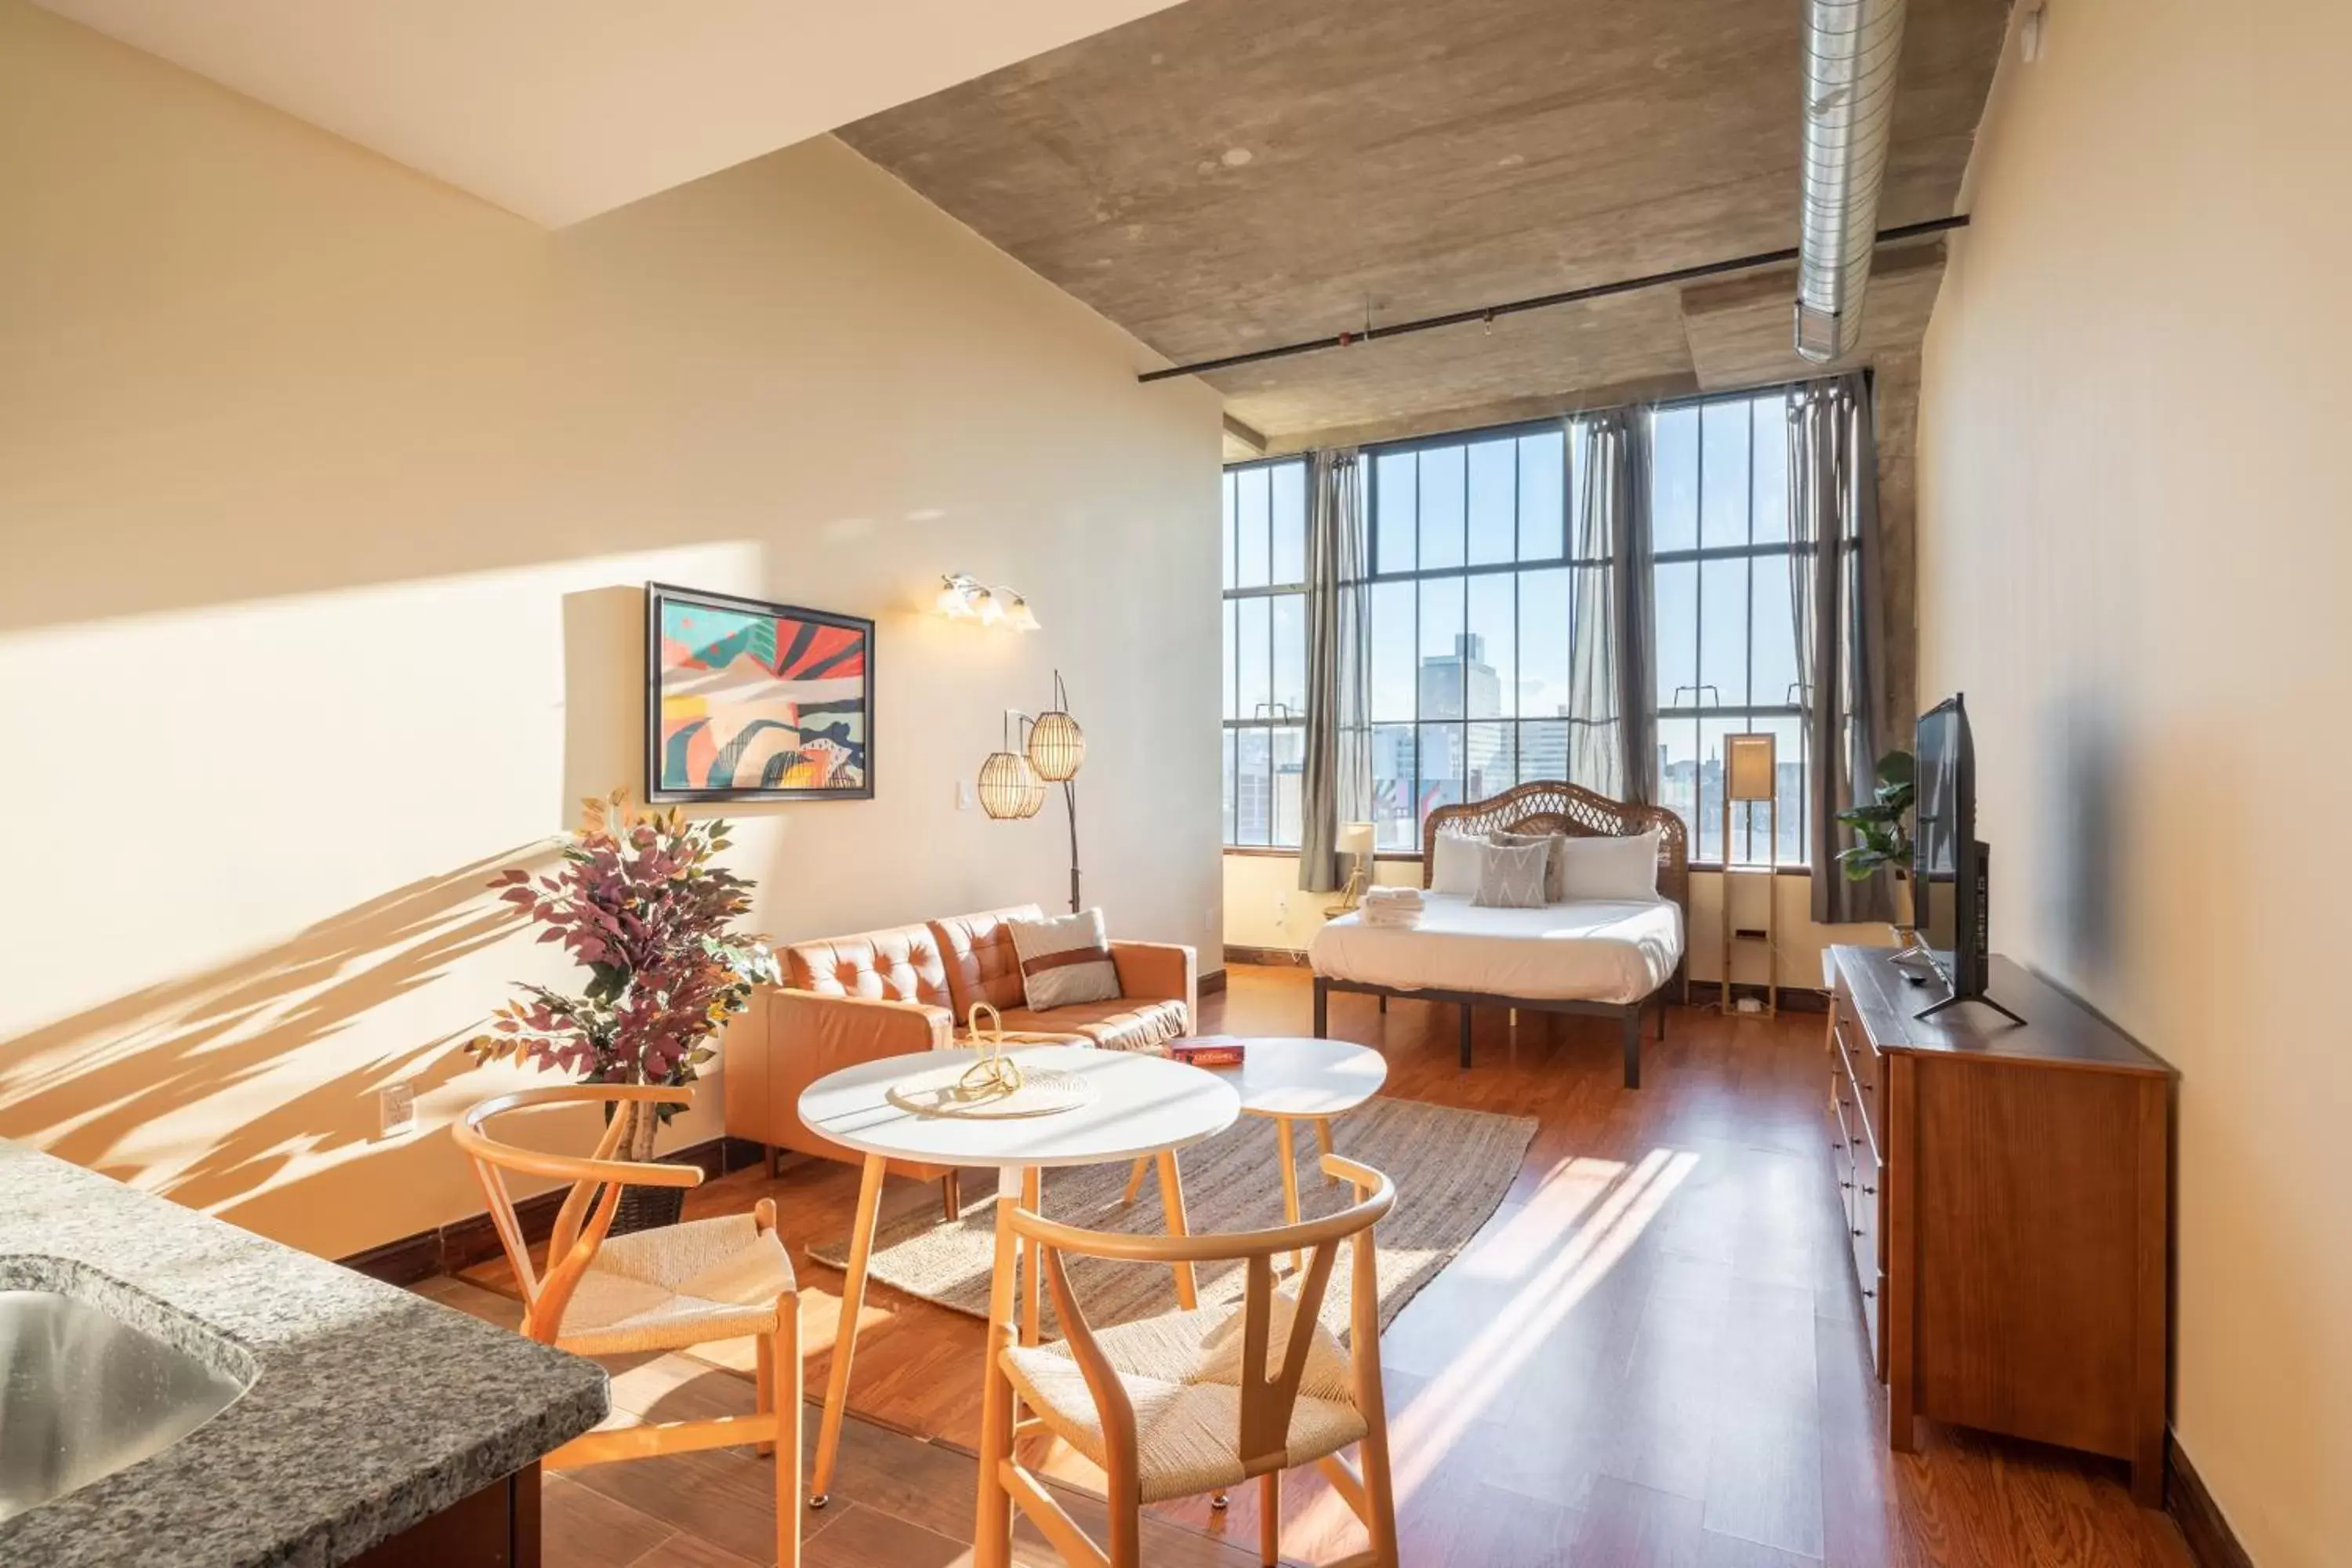 Loft in Sosuite at Independence Lofts - Callowhill